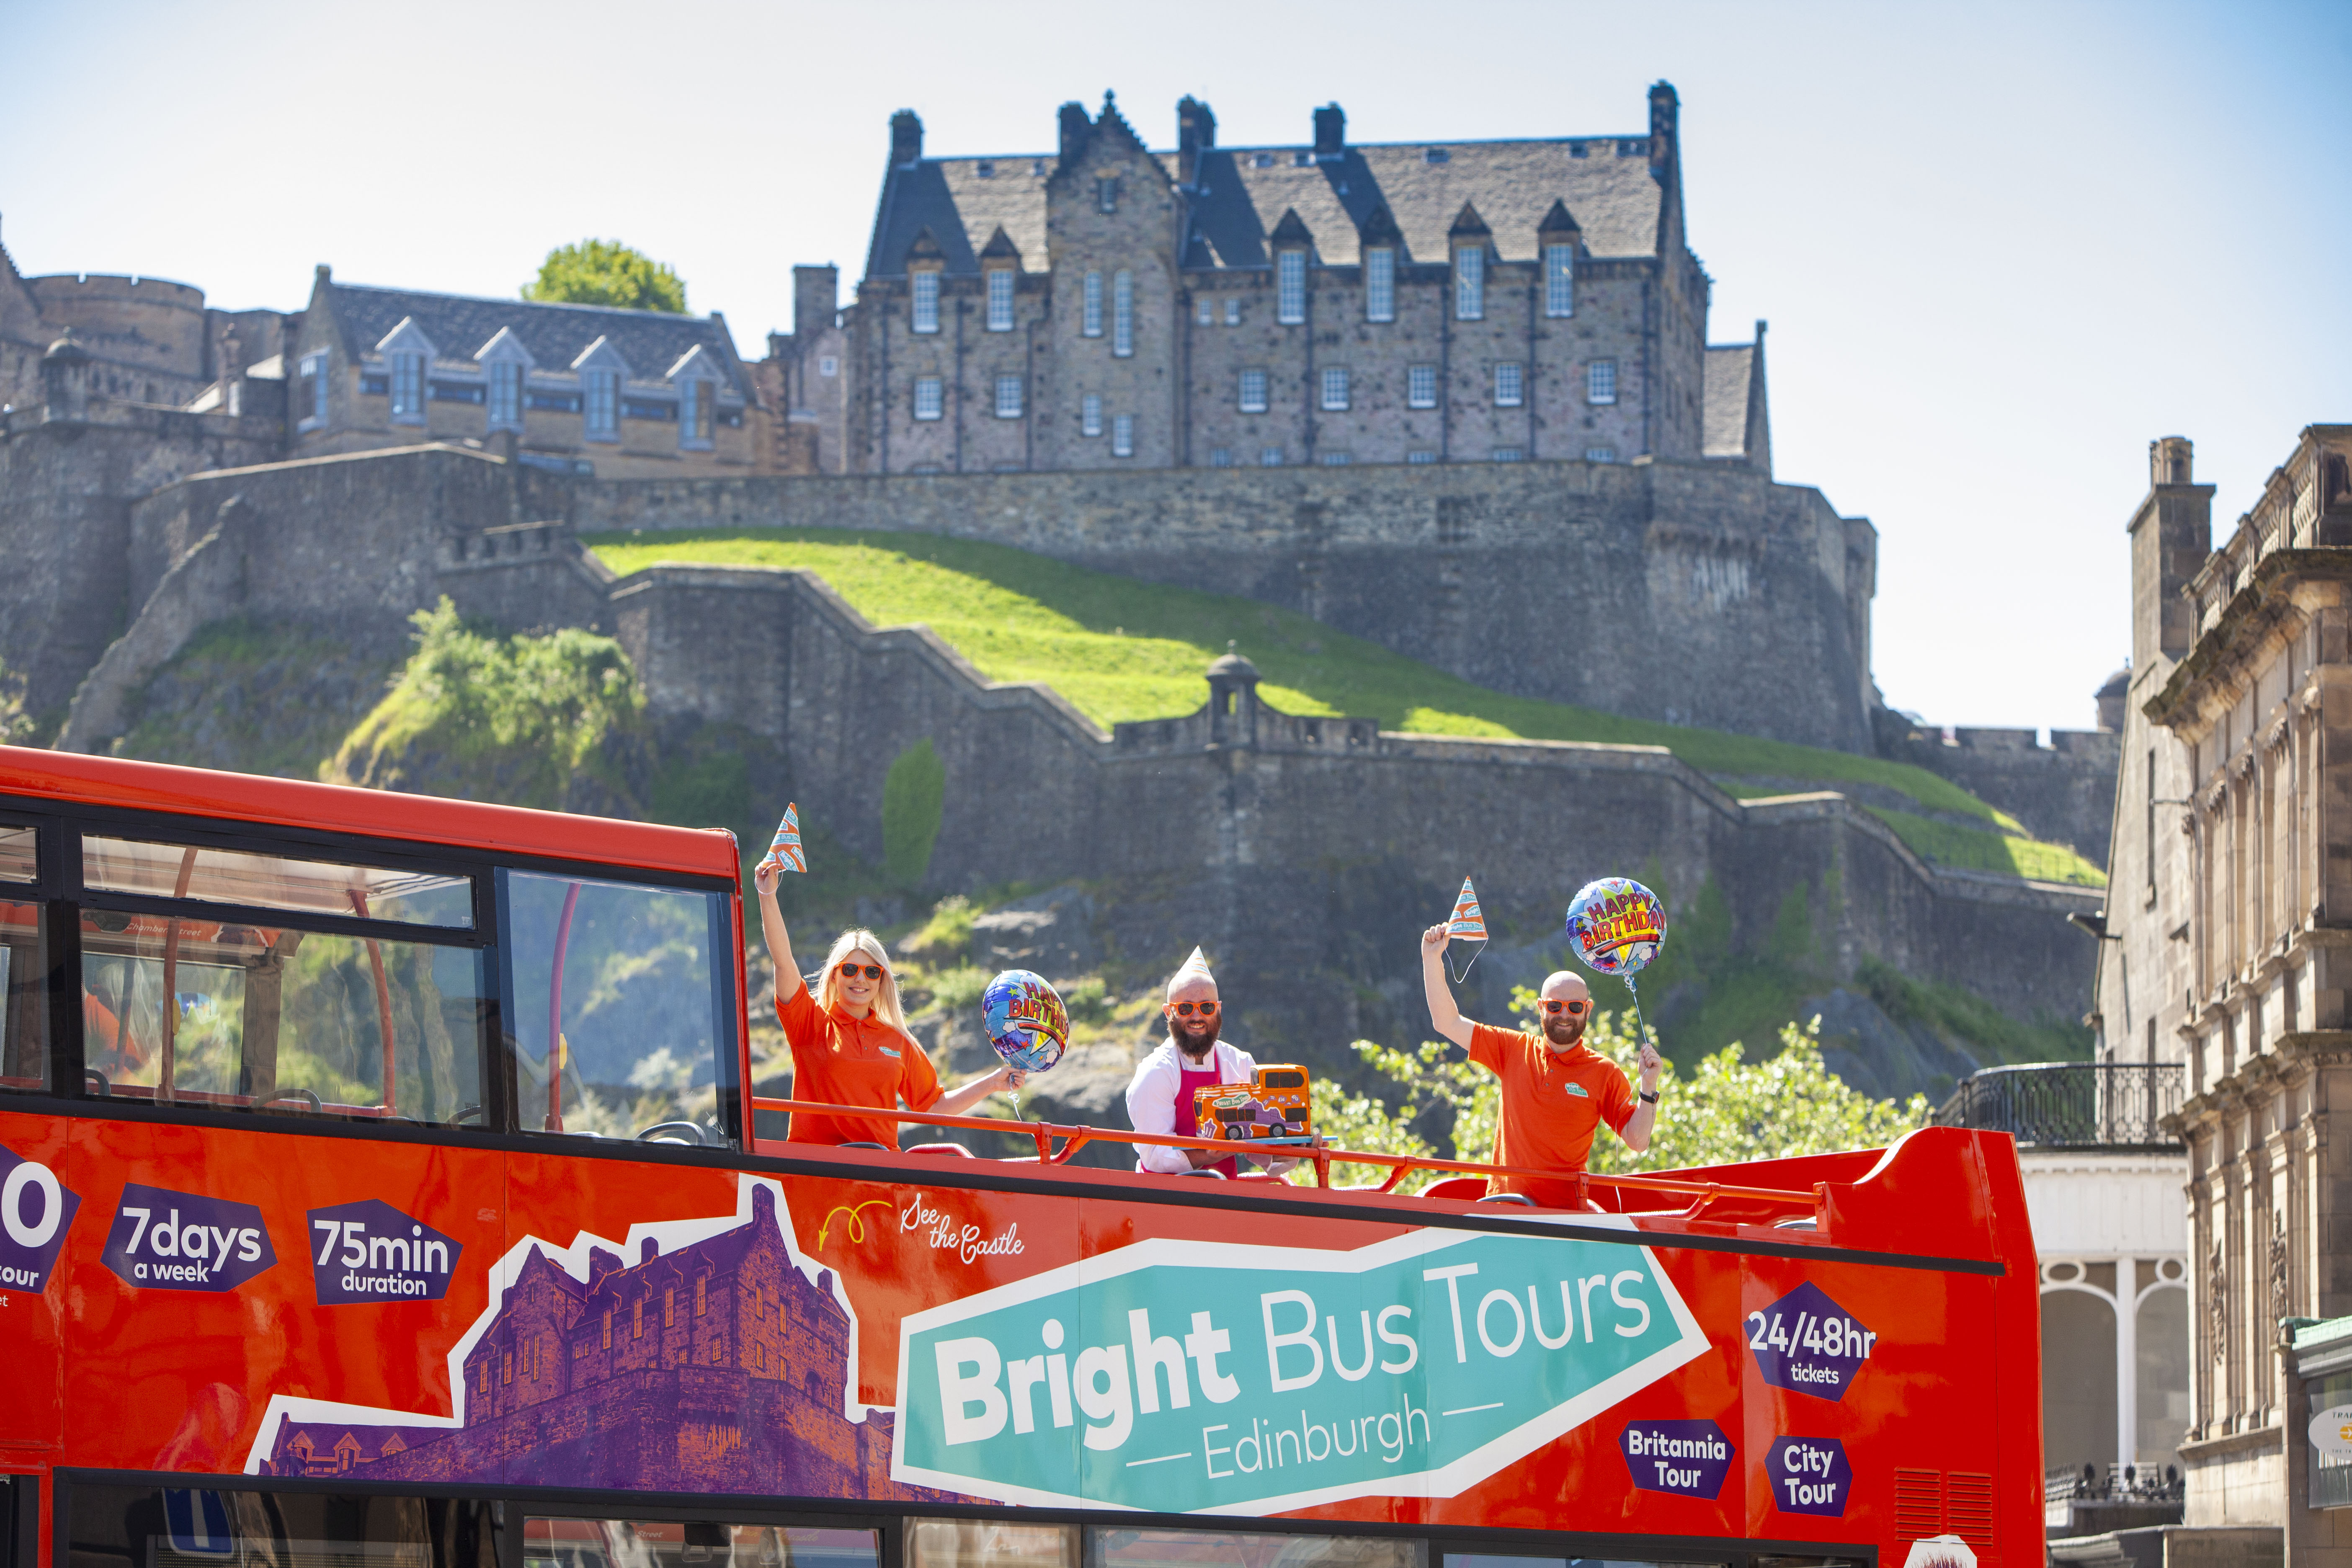 Bright Bus Tours turns two